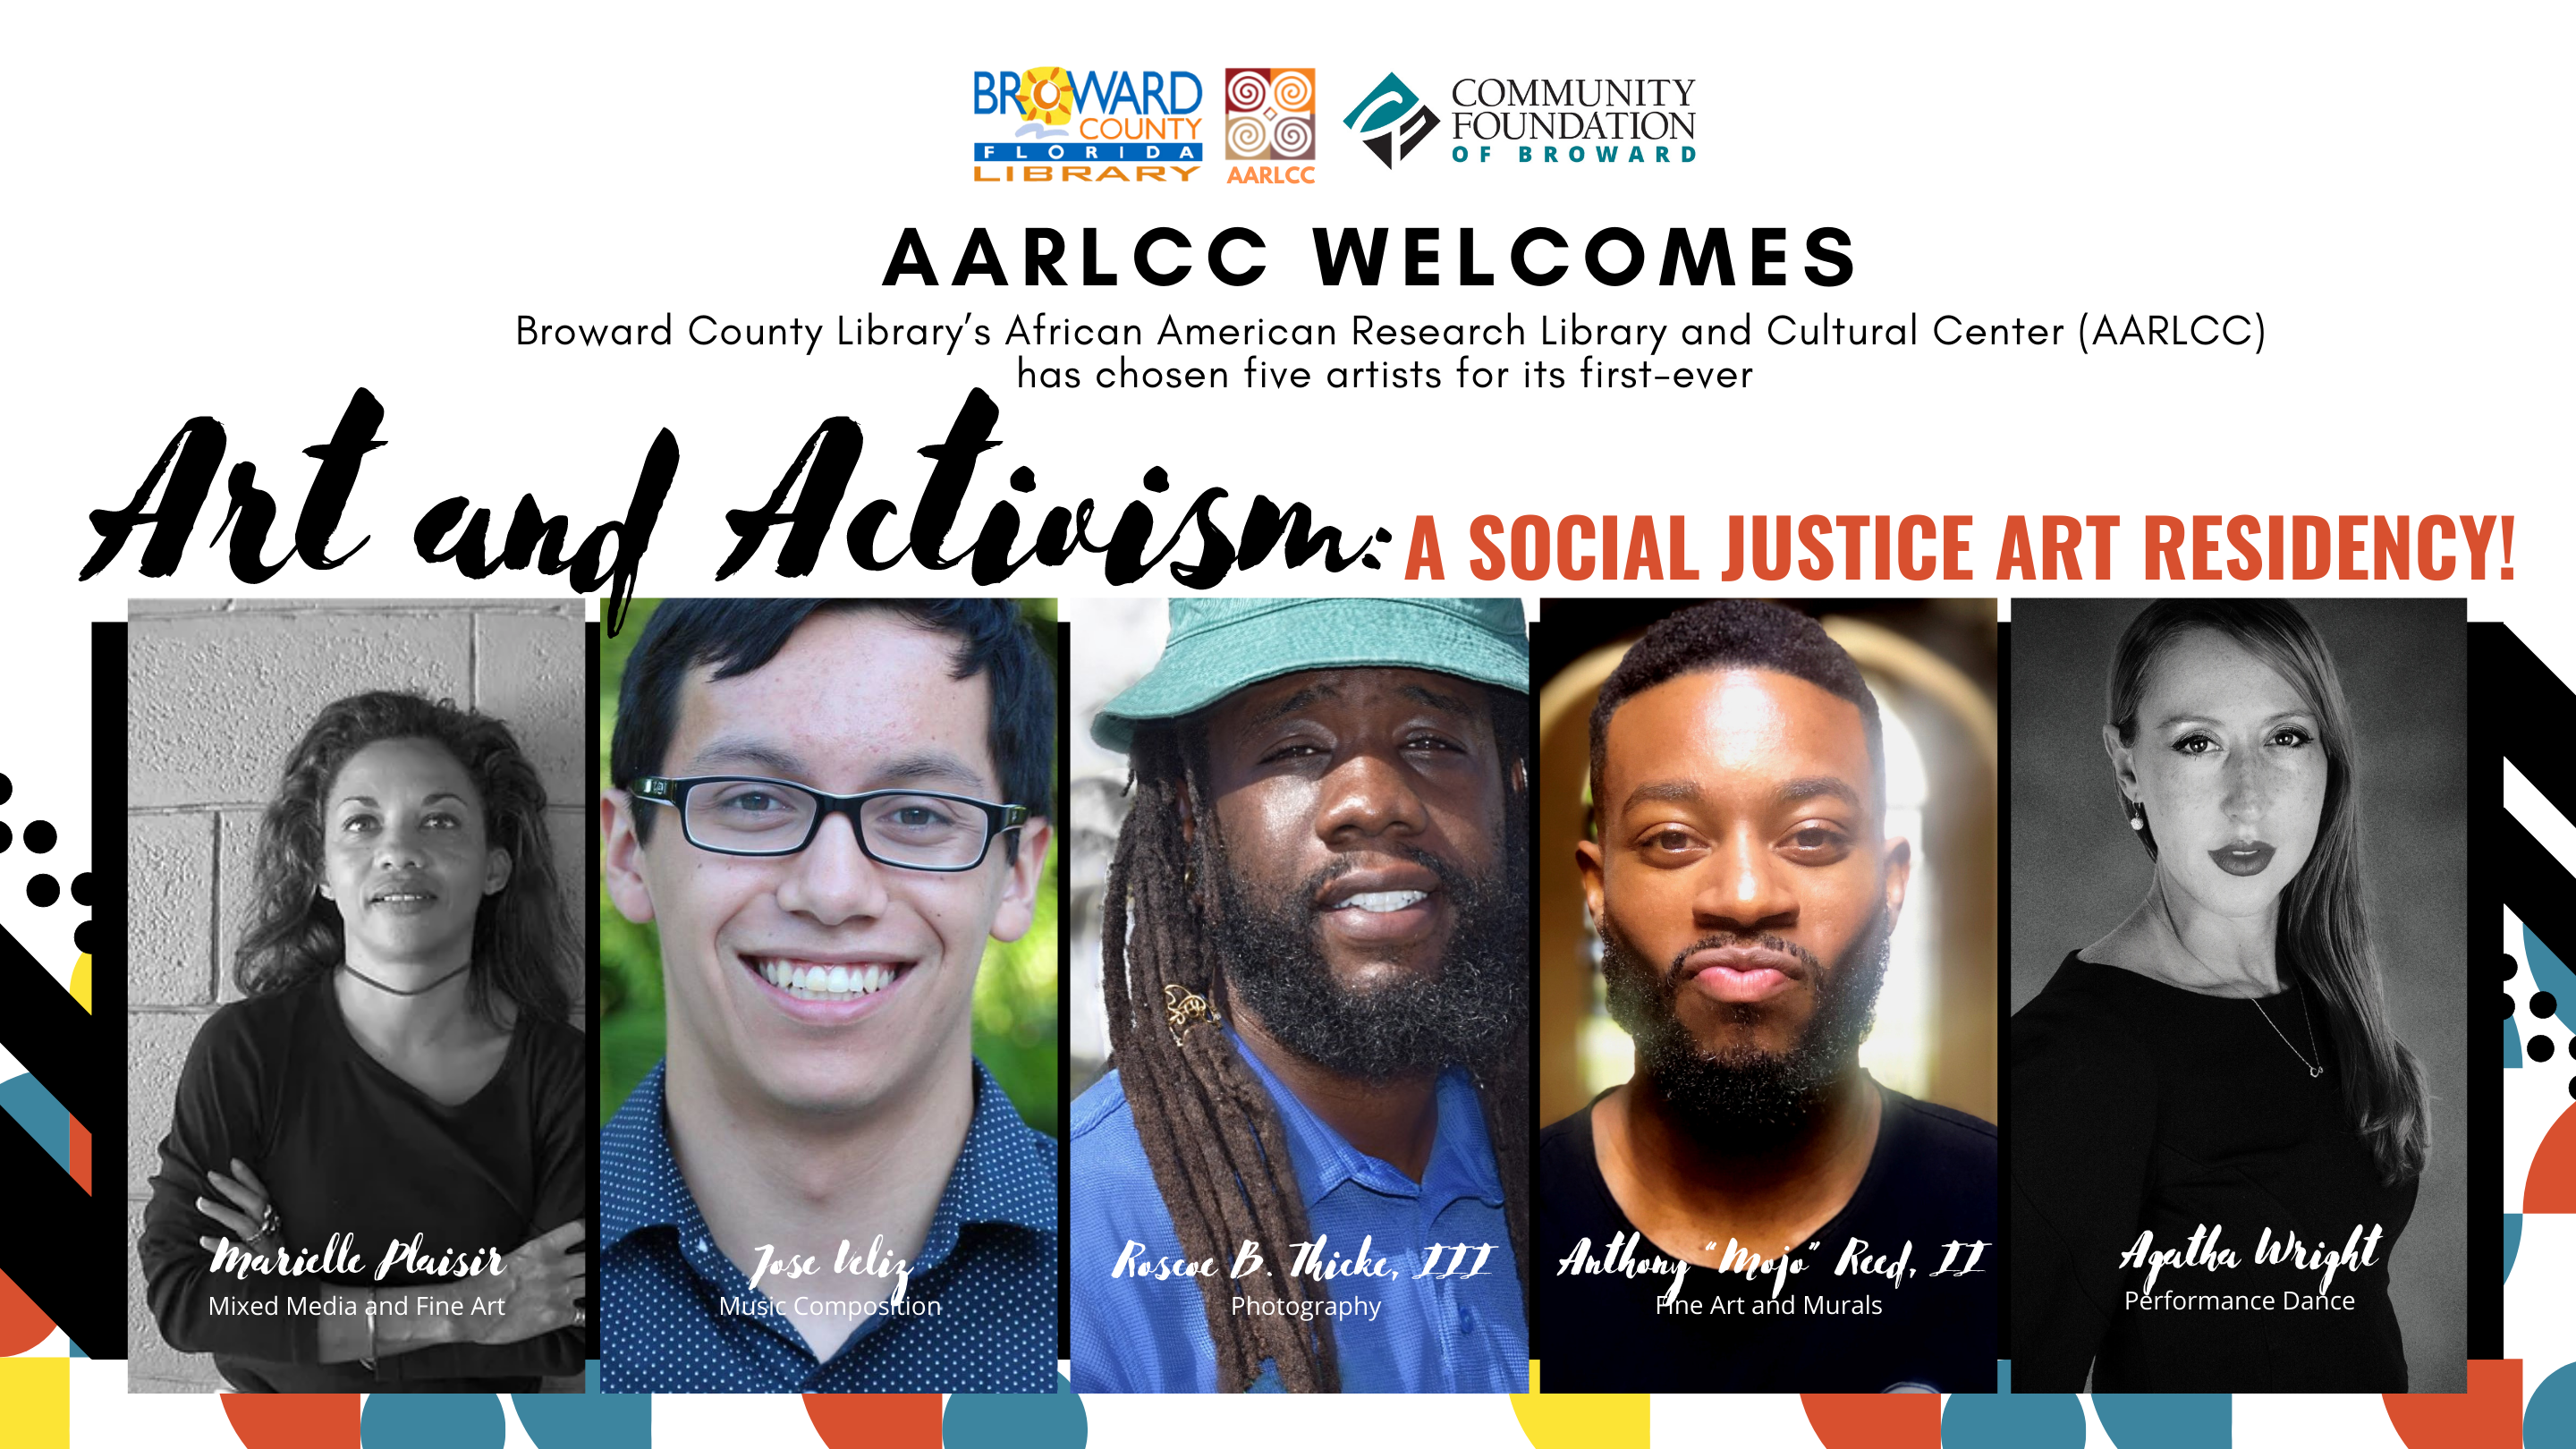 Art and Activism: A Social Justice Art Residency Project